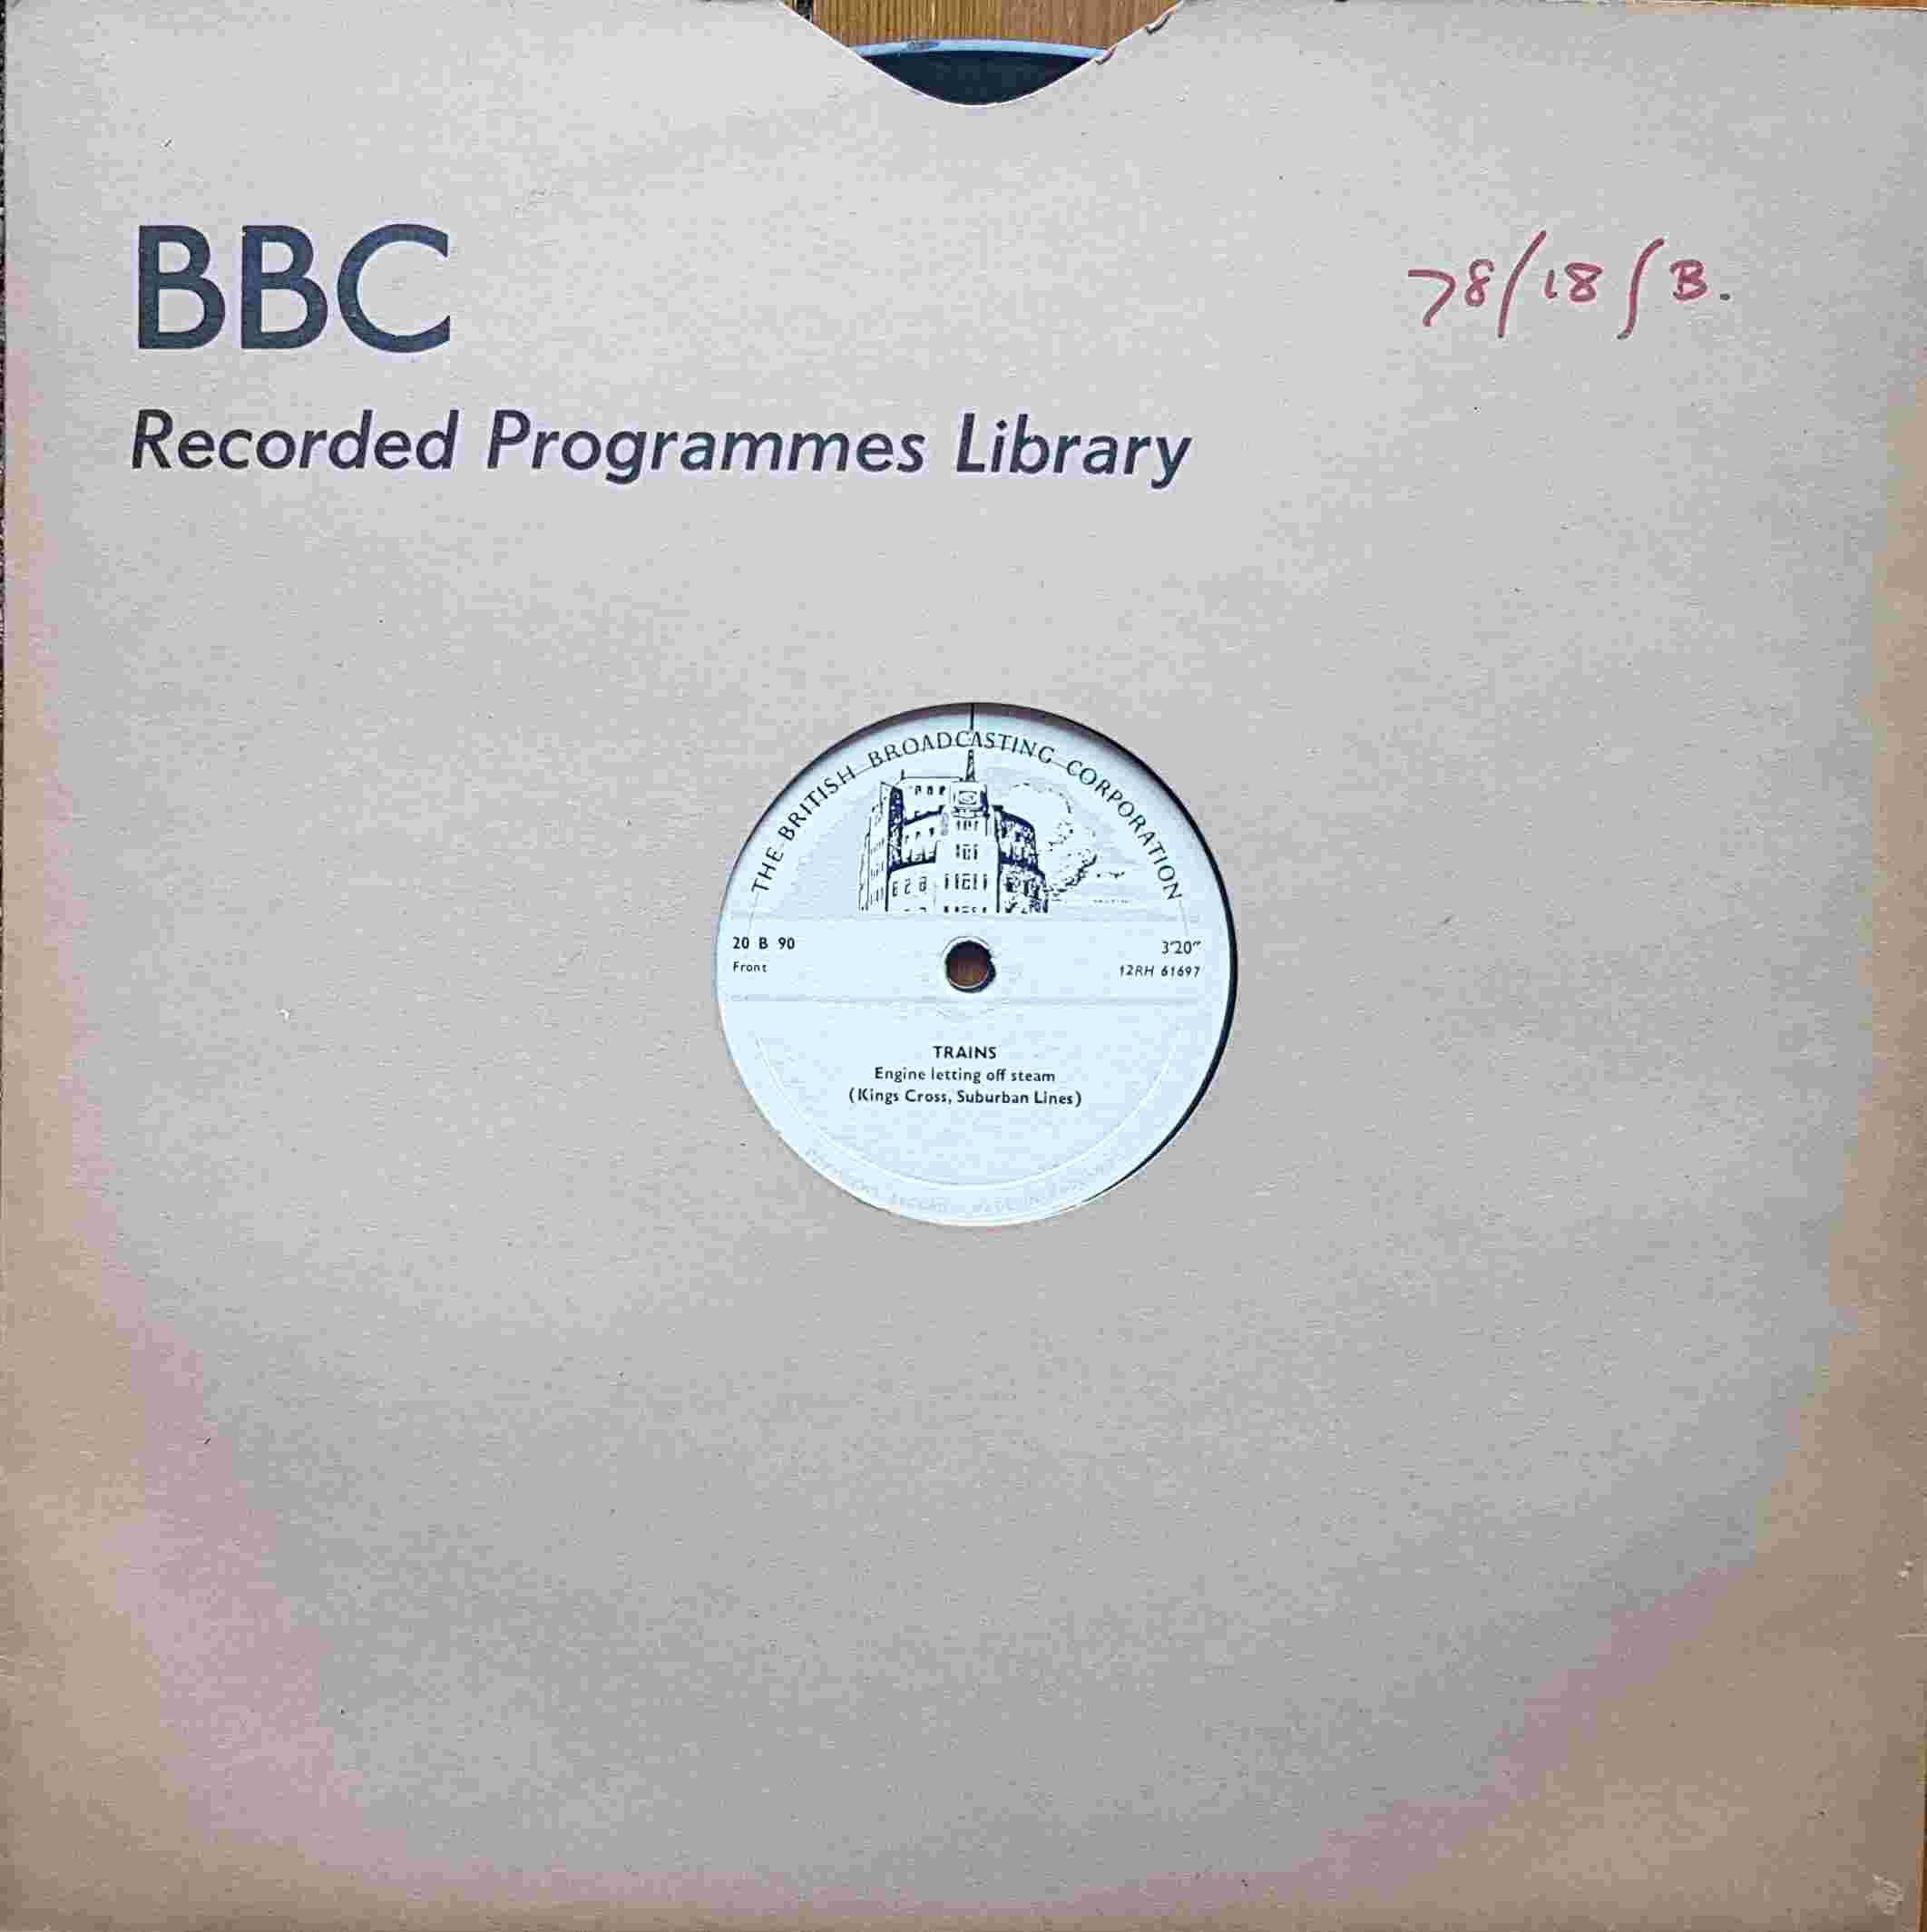 Picture of 20 B 90 Trains by artist Not registered from the BBC records and Tapes library